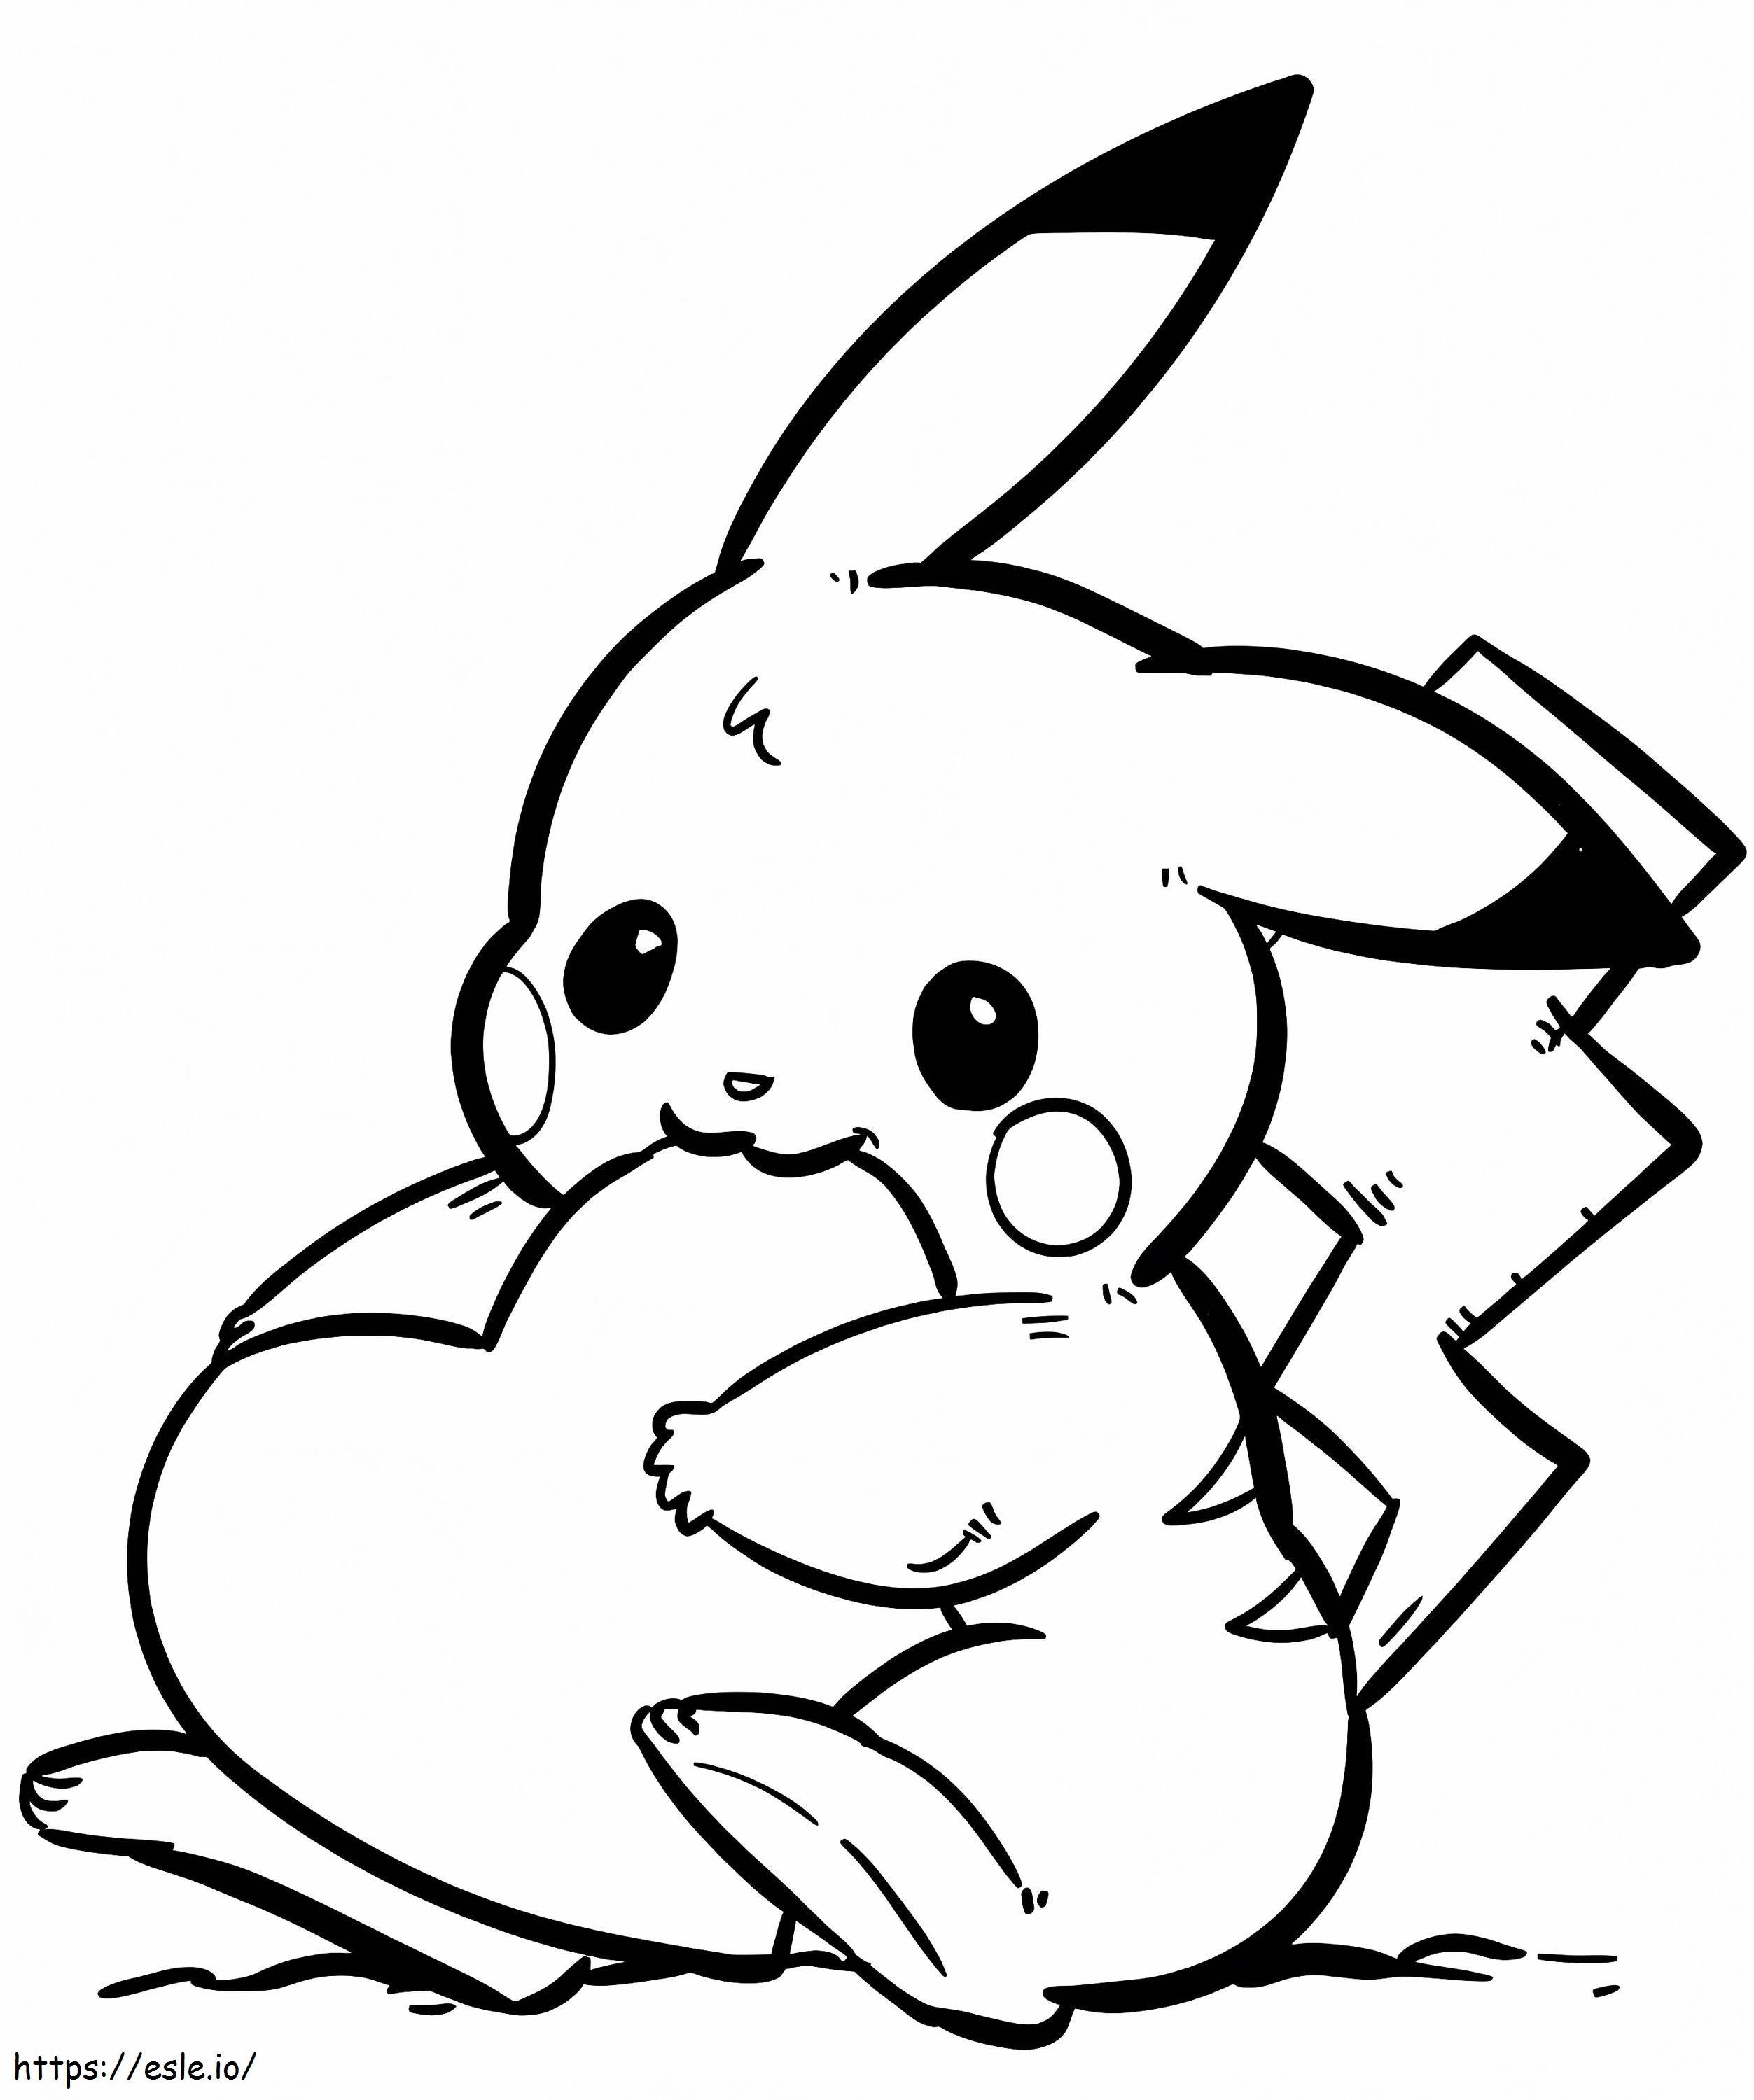 Pikachu With Heart Shape coloring page